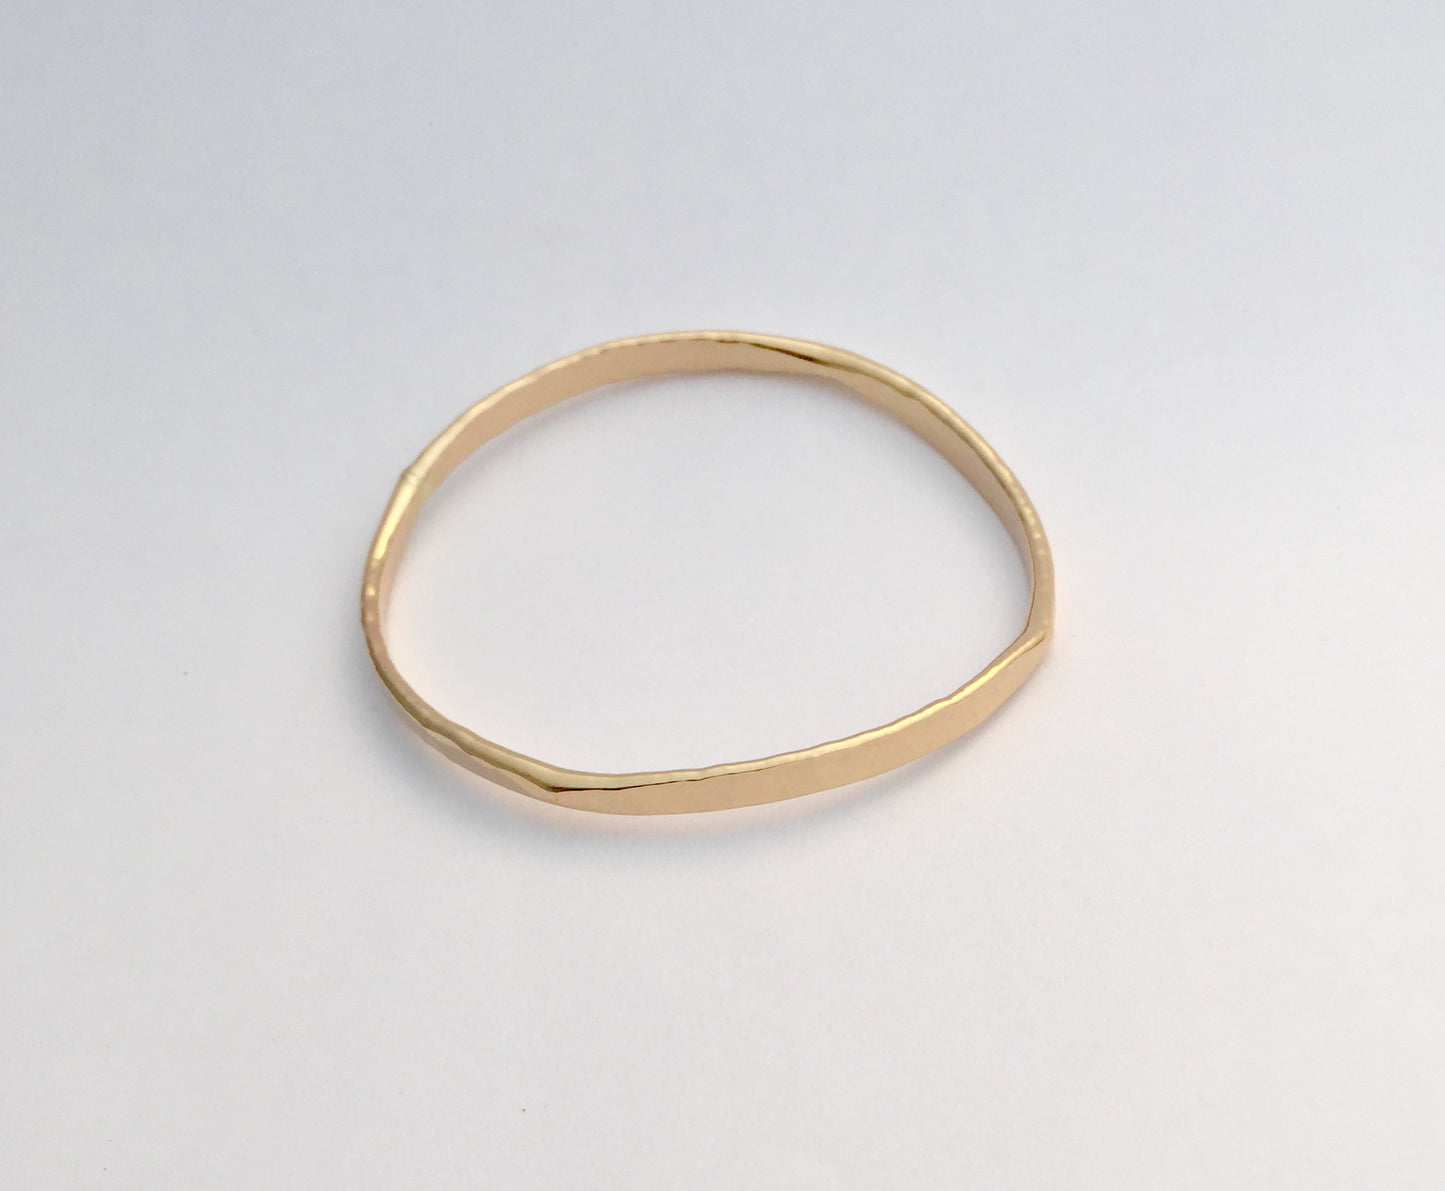 Hand forged 14K gold filled bangle 'square'.